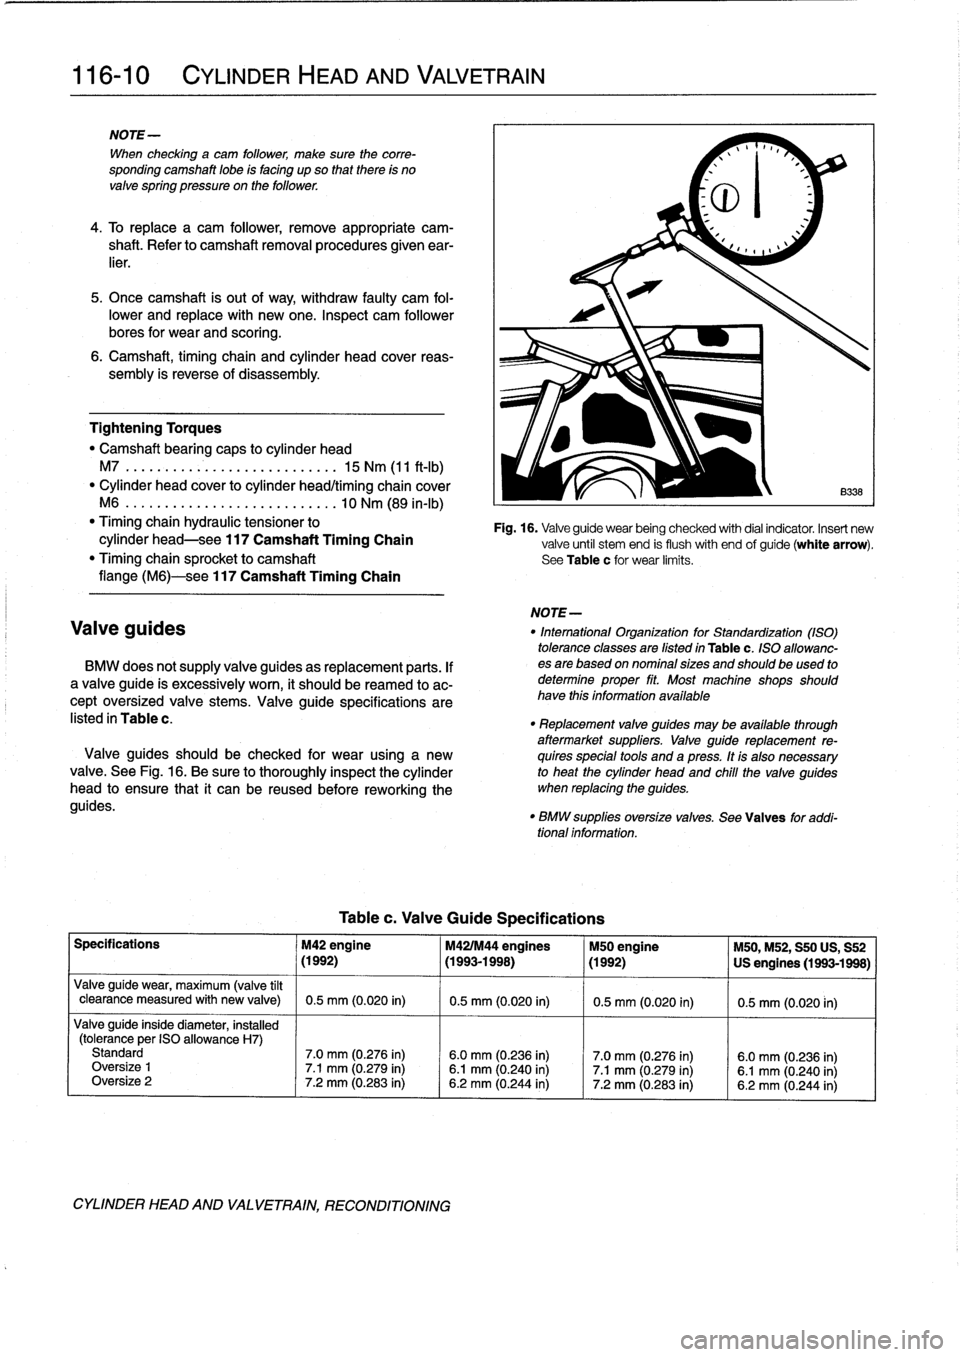 BMW M3 1993 E36 Owners Guide 
116-
1
0

	

CYLINDER
HEADAND
VALVETRAIN

NOTE-

When
checking
a
cam
follower,
make
sure
the
corre-
sponding
camshaft
lobe
ís
facing
up
so
that
there
is
no
valve
spring
pressure
on
the
follower
.

4